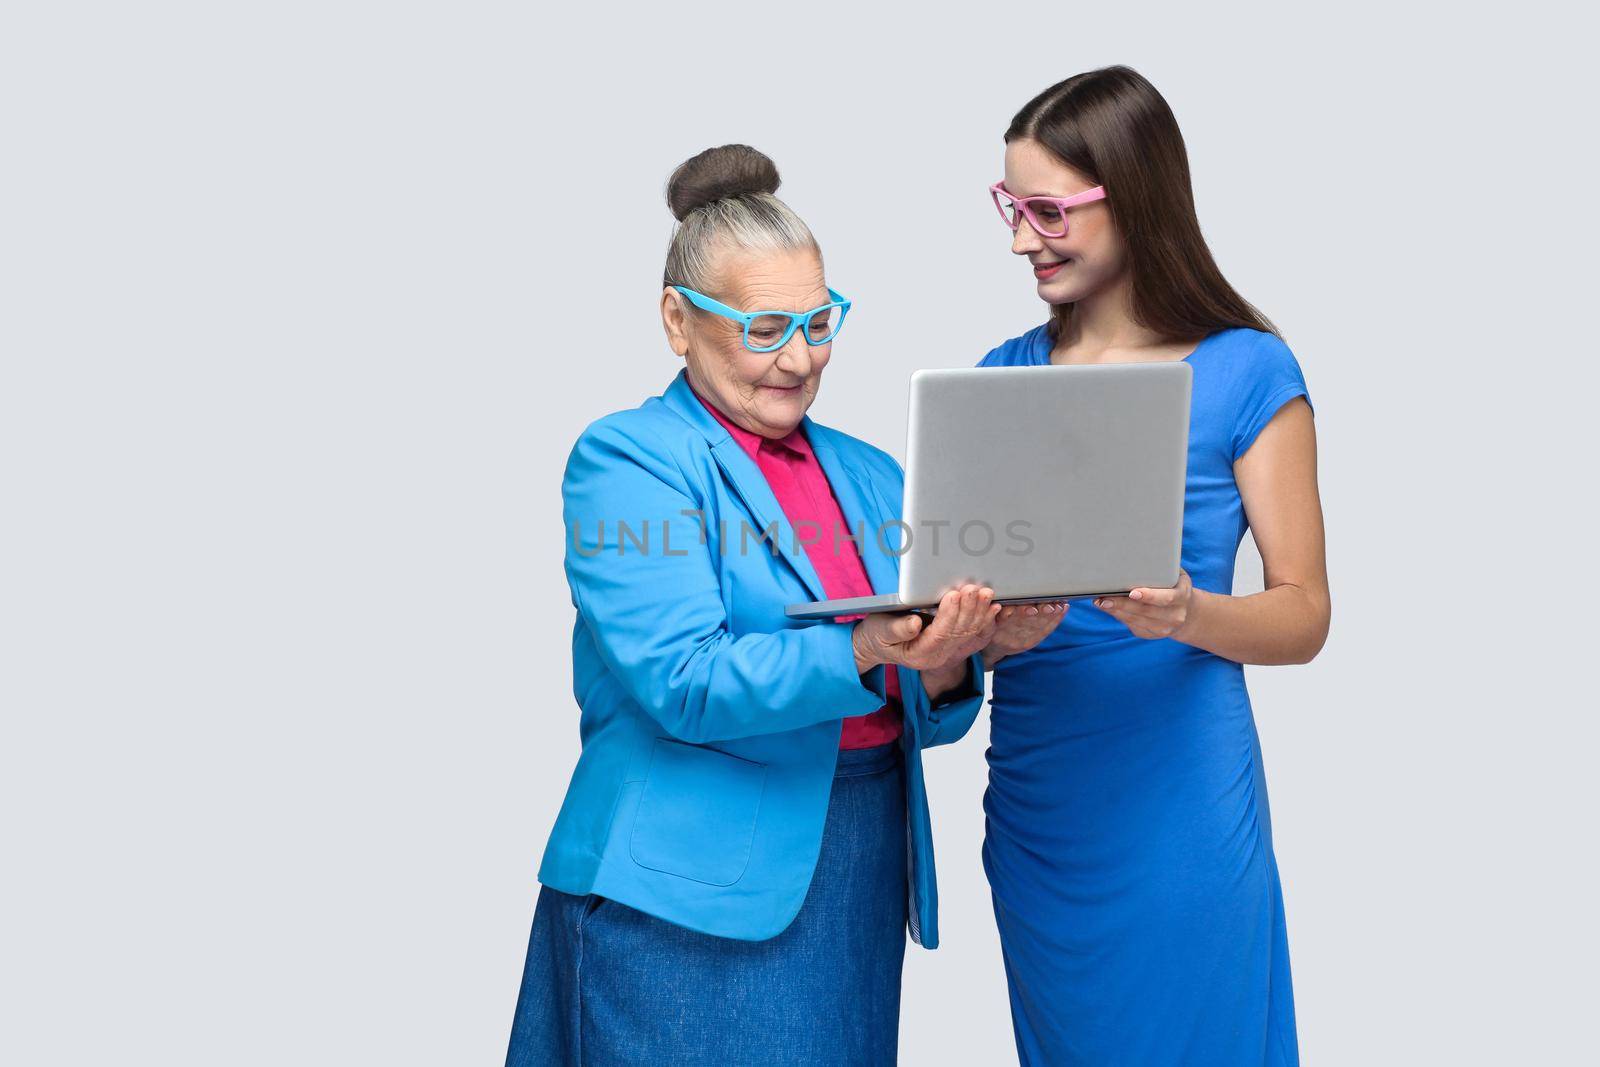 happy grandmother education or woman for work in social networking. granddaughter trying to teach her grandma to use laptop and working on internet. indoor, studio shot, isolated on gray background.